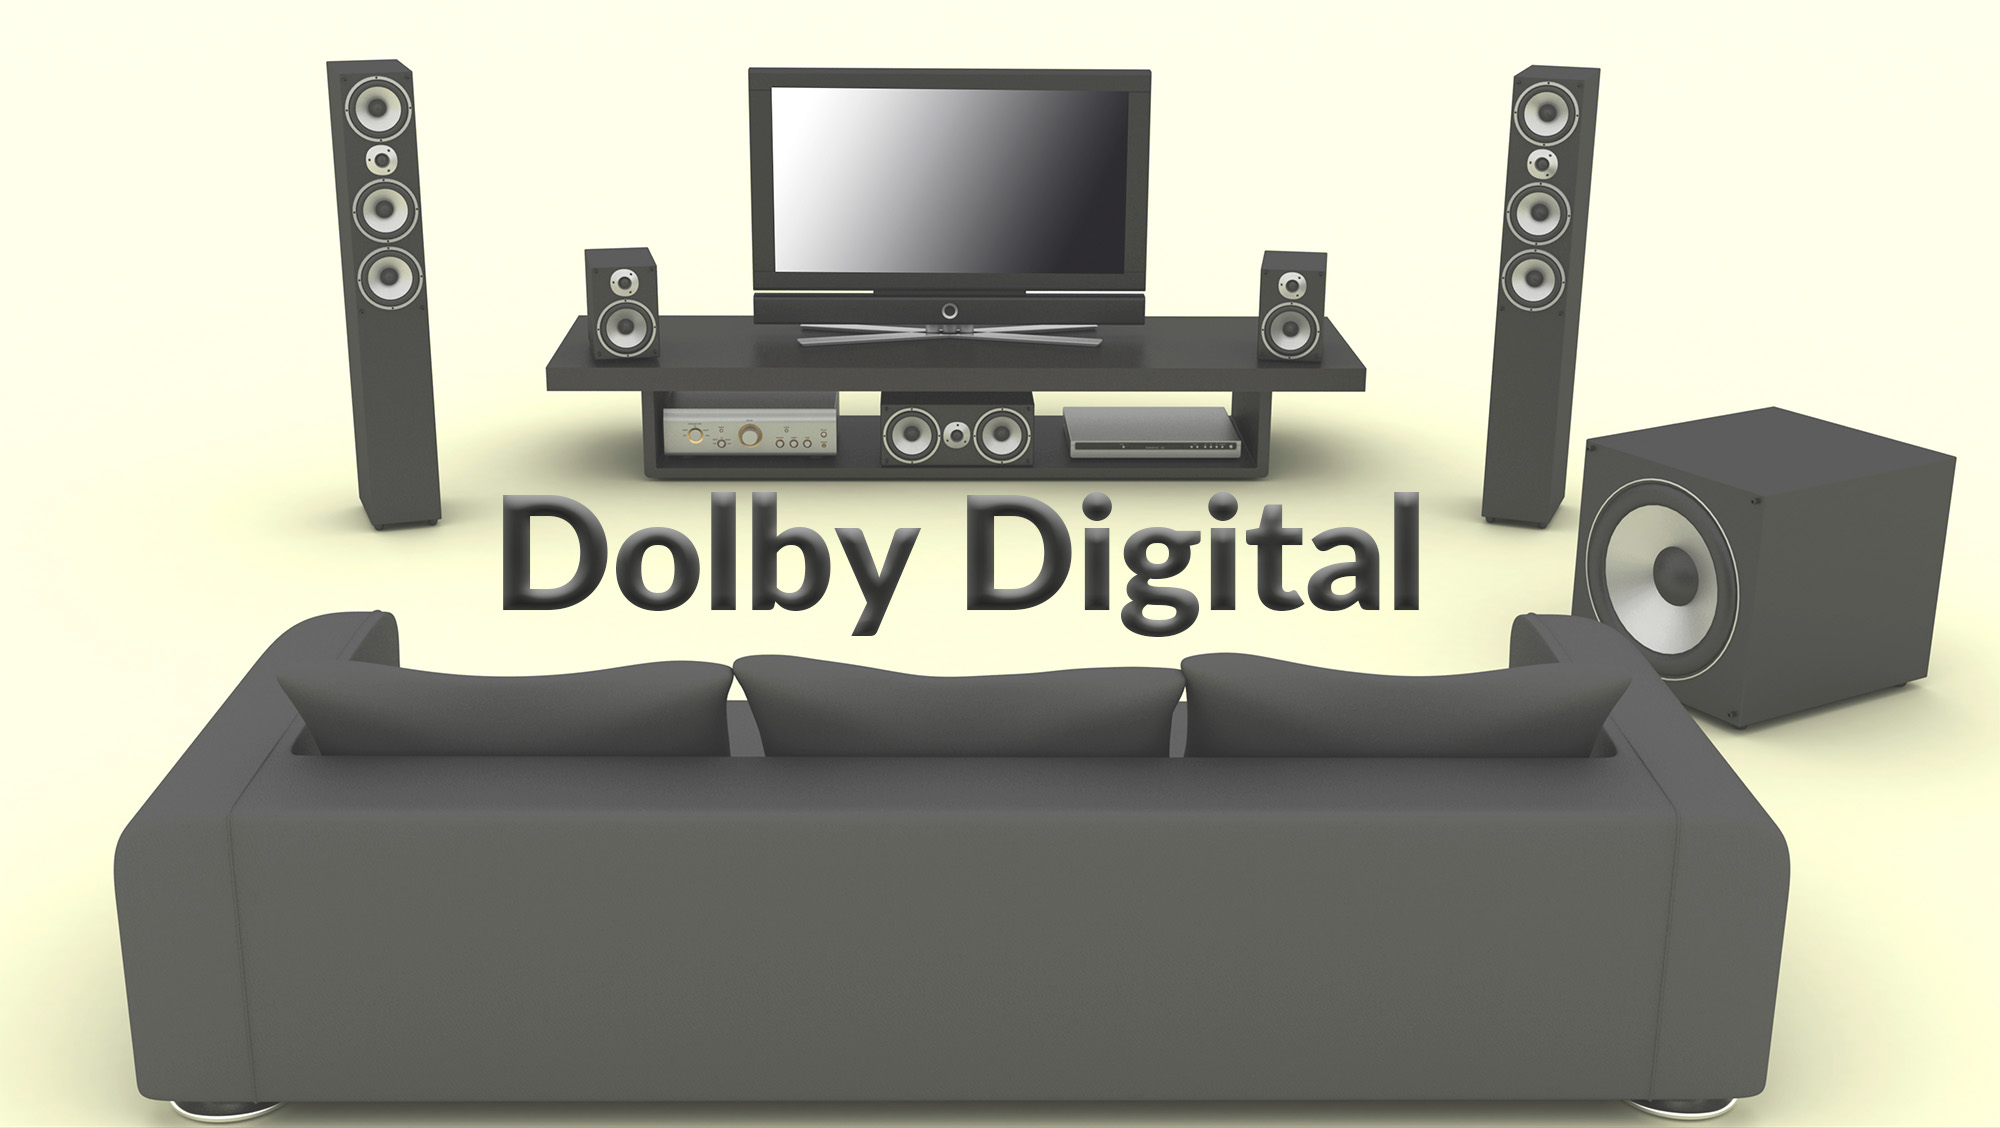 dolby-digital-7-facts-for-an-enhanced-home-theater-experience